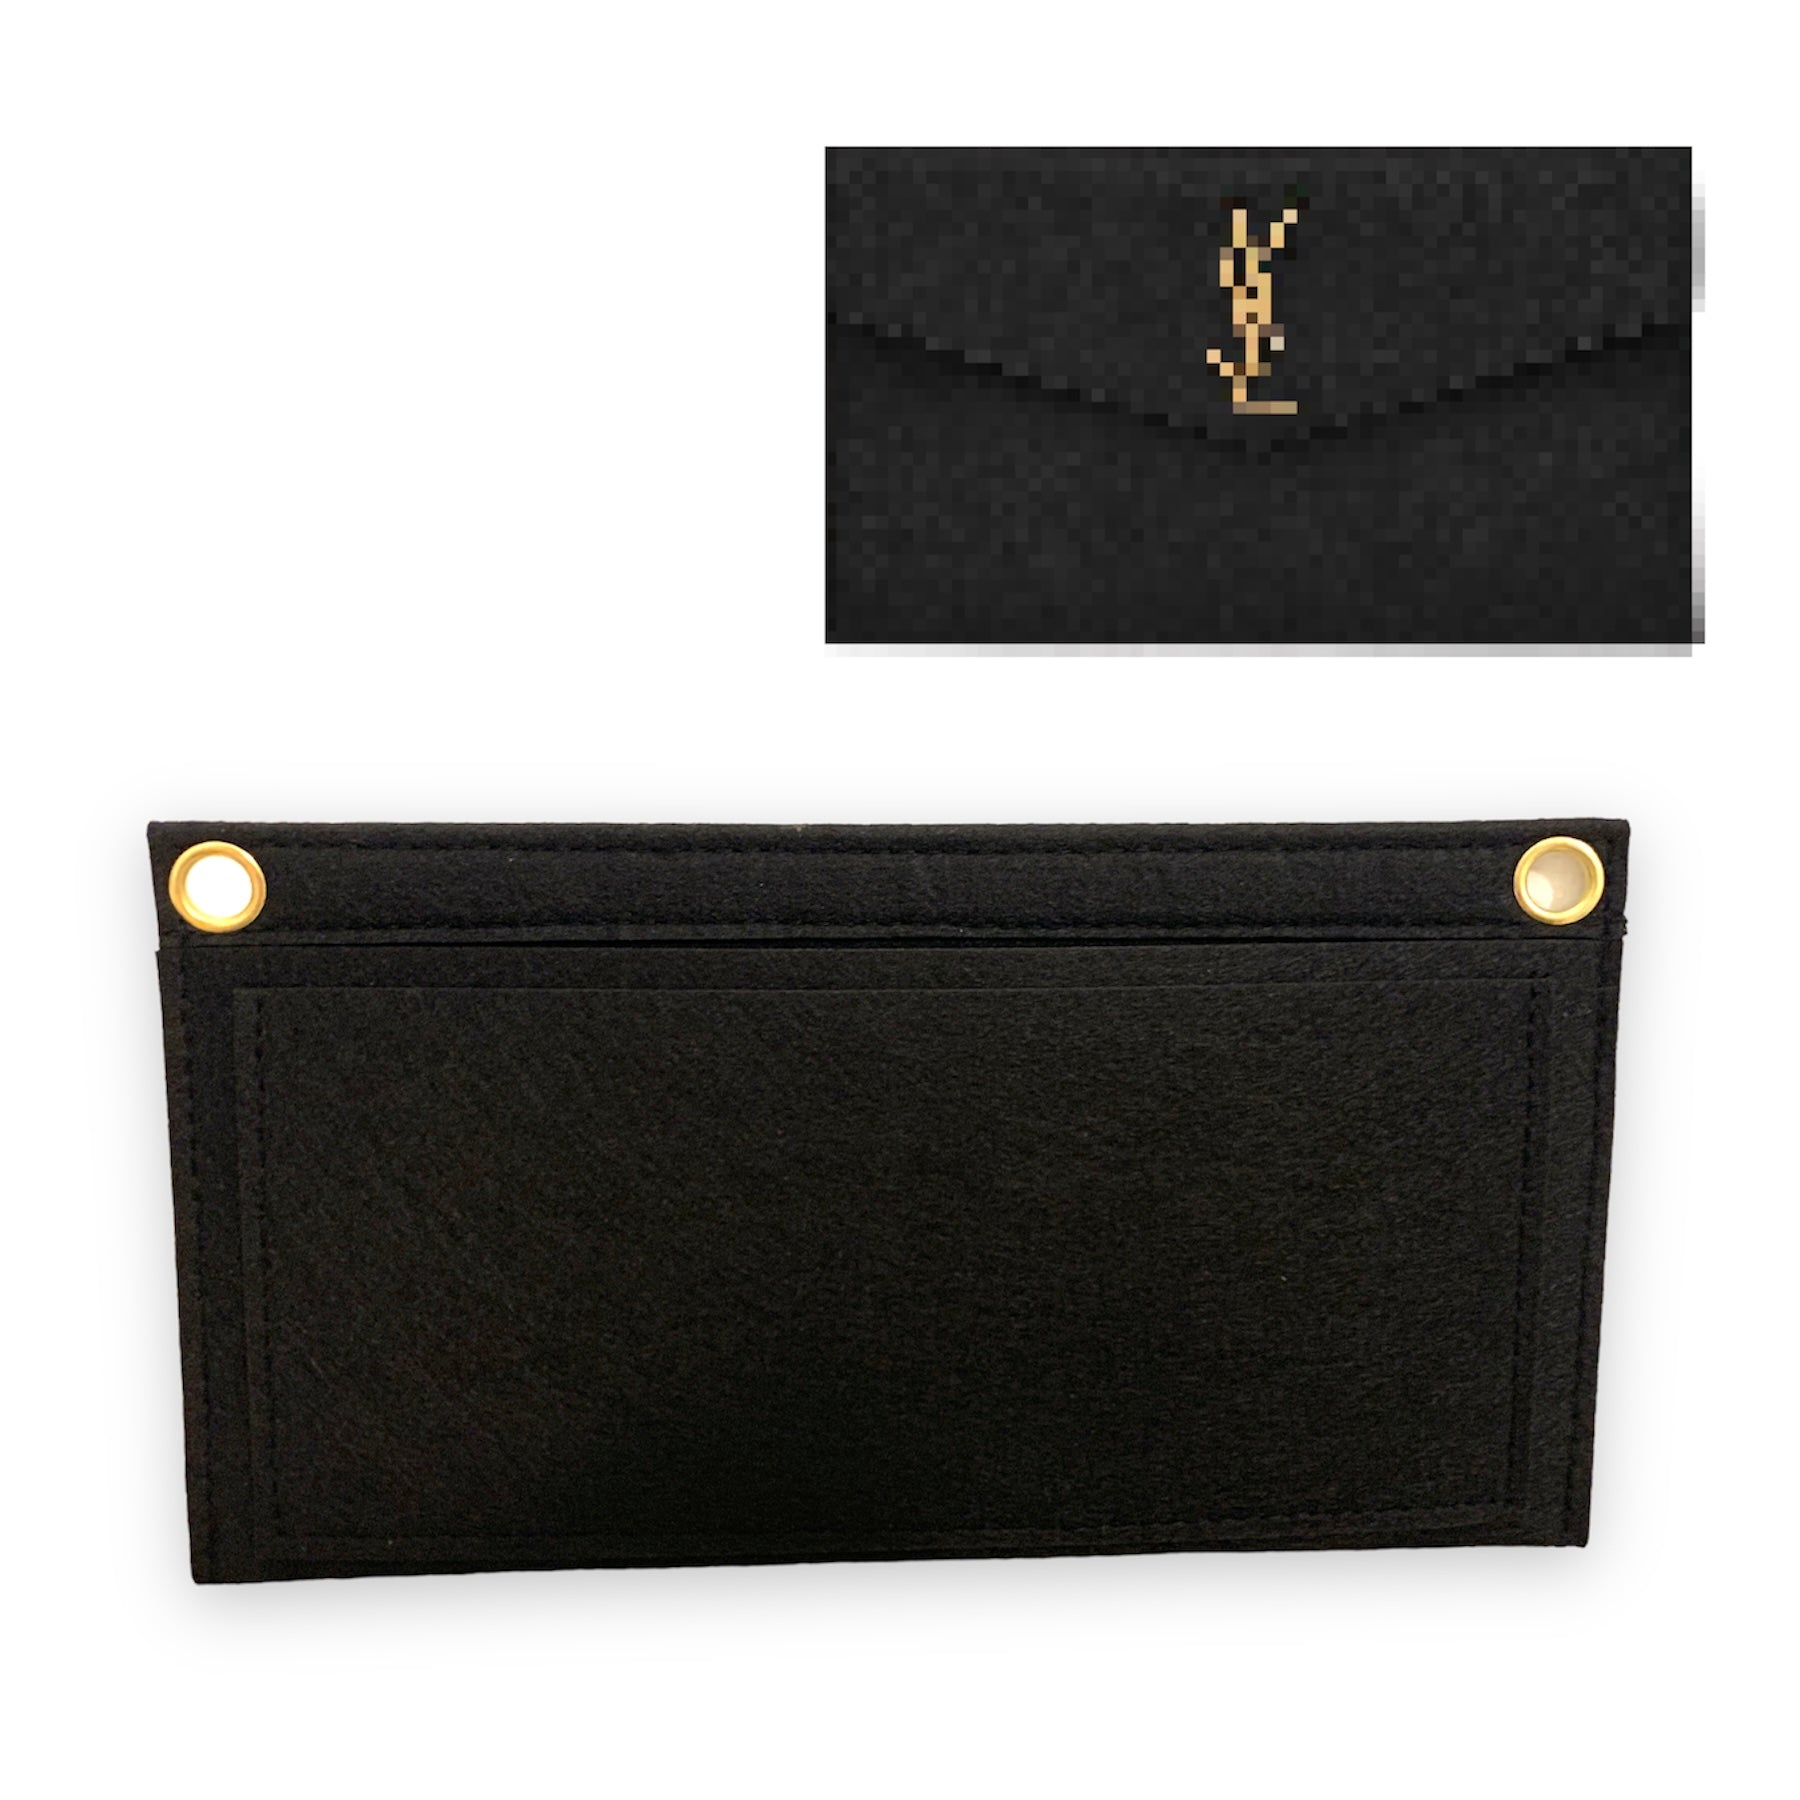 LV TOILETRY 26 BEIGE CONVERSION KIT POUCH:1 INSERT ORGANIZER LINER & 2  CHAINS